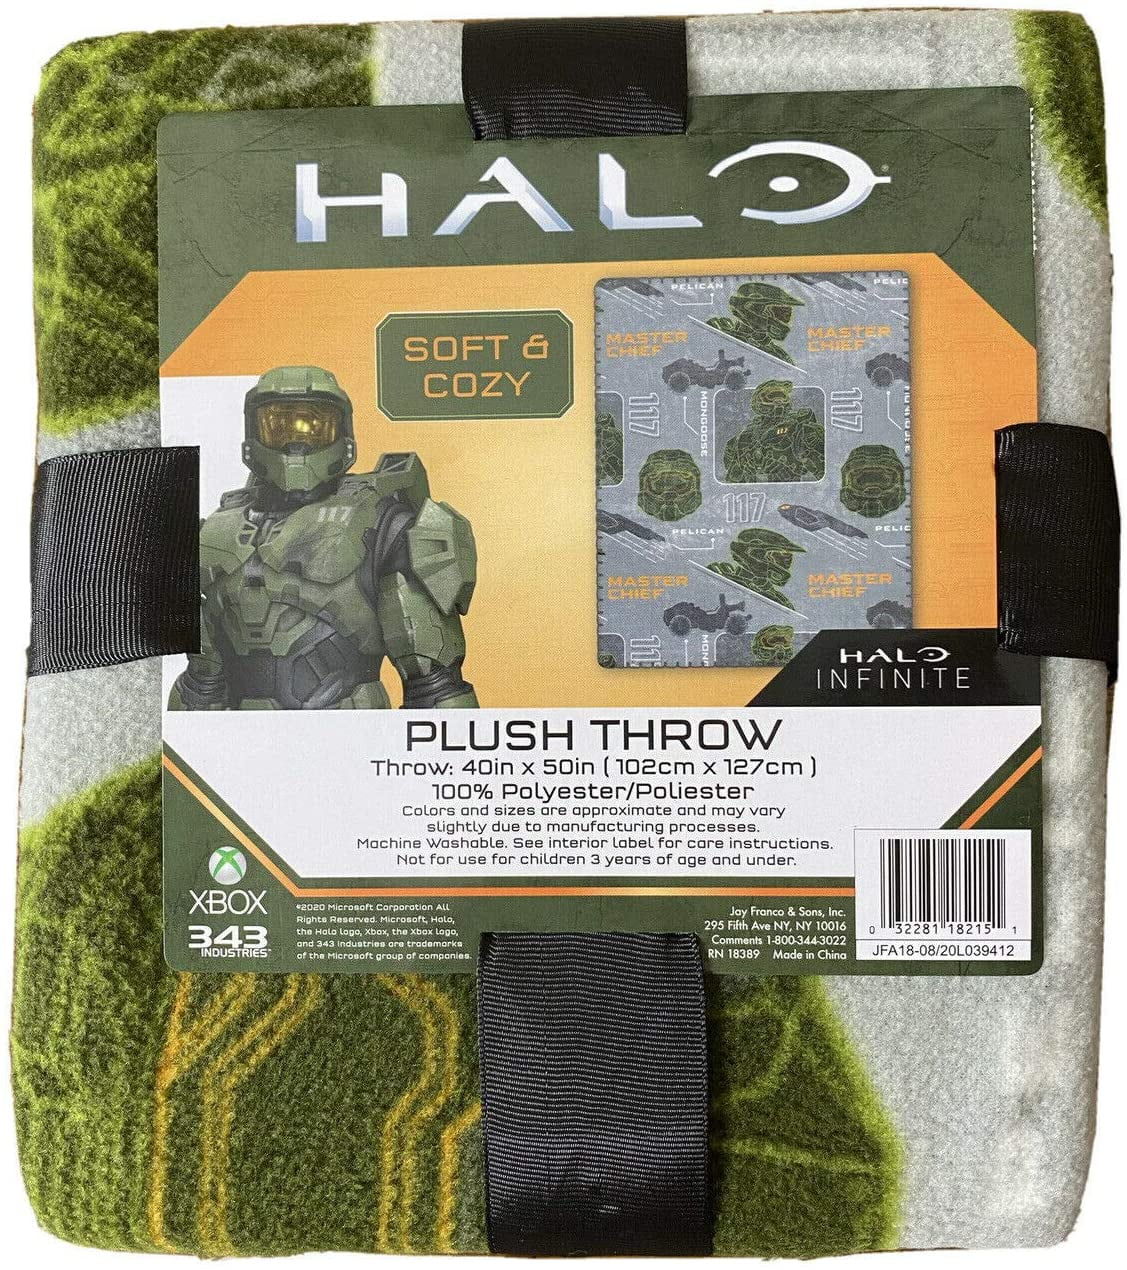 HALO Plush Throw Blanket  40" x 50"  100% Polyester Gray Green color  BRAND NEW 